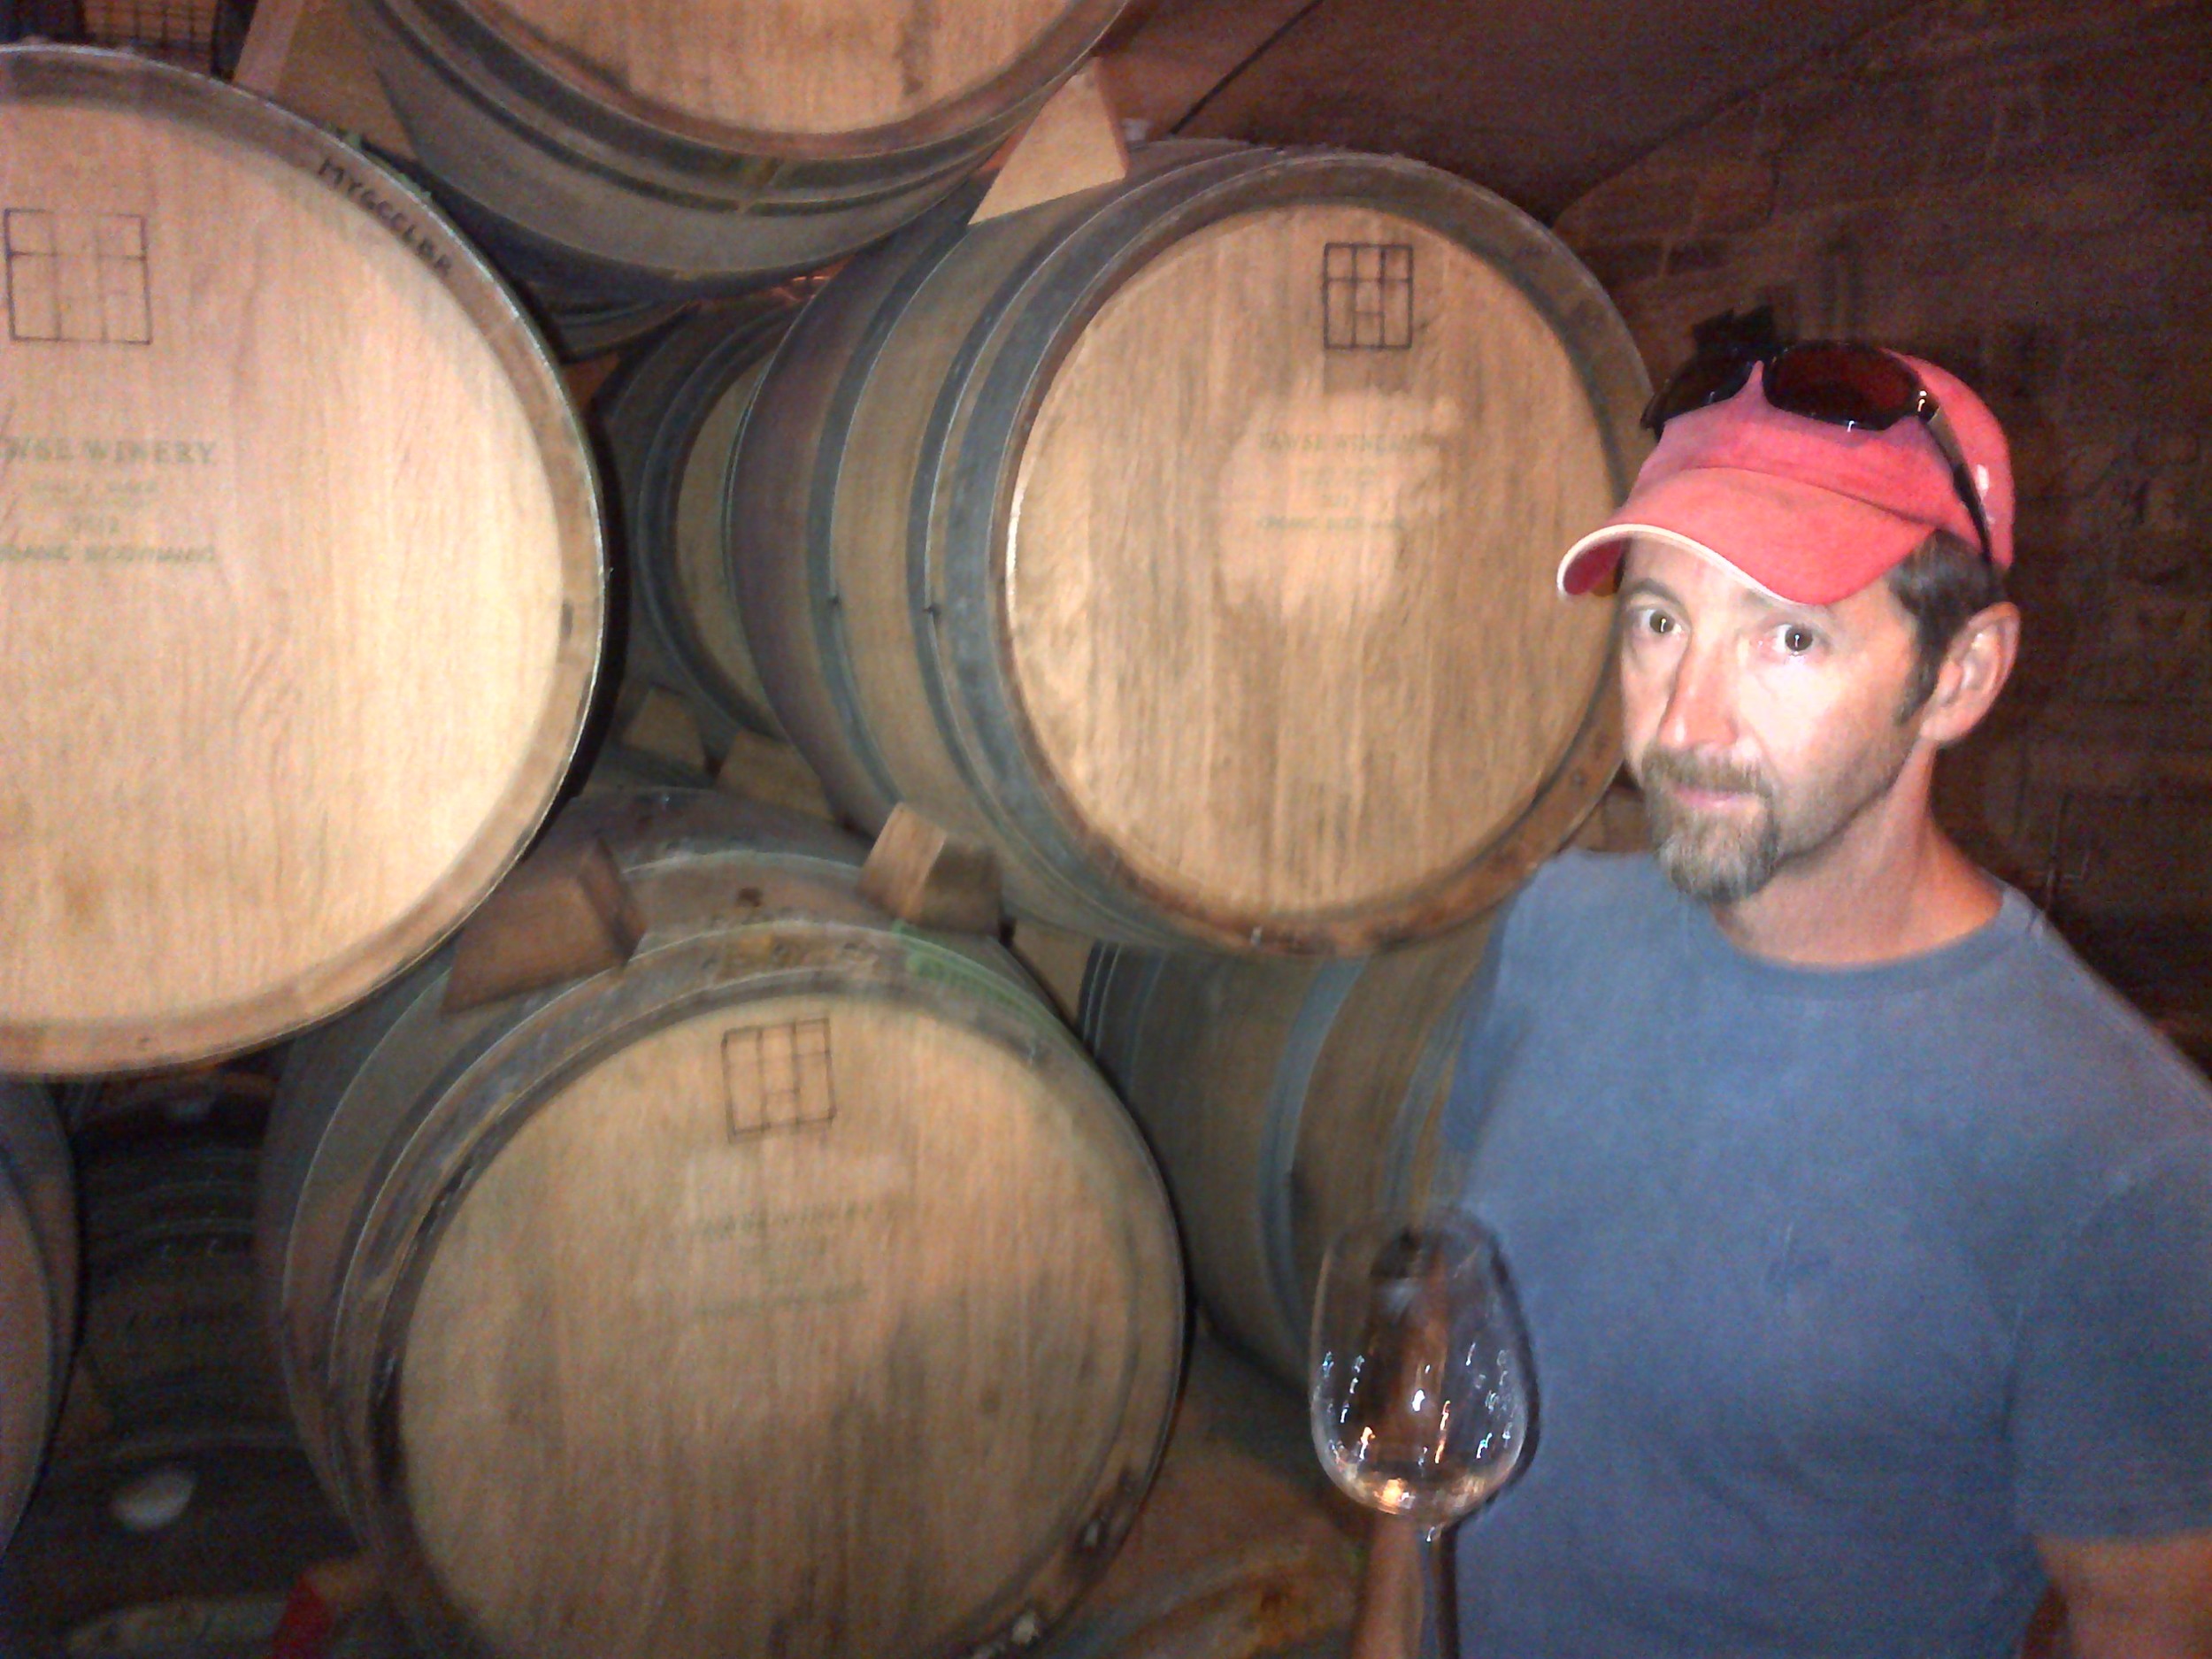  Barrel tasting Chardonnays with Paul Pender in the cellar at Tawse.  